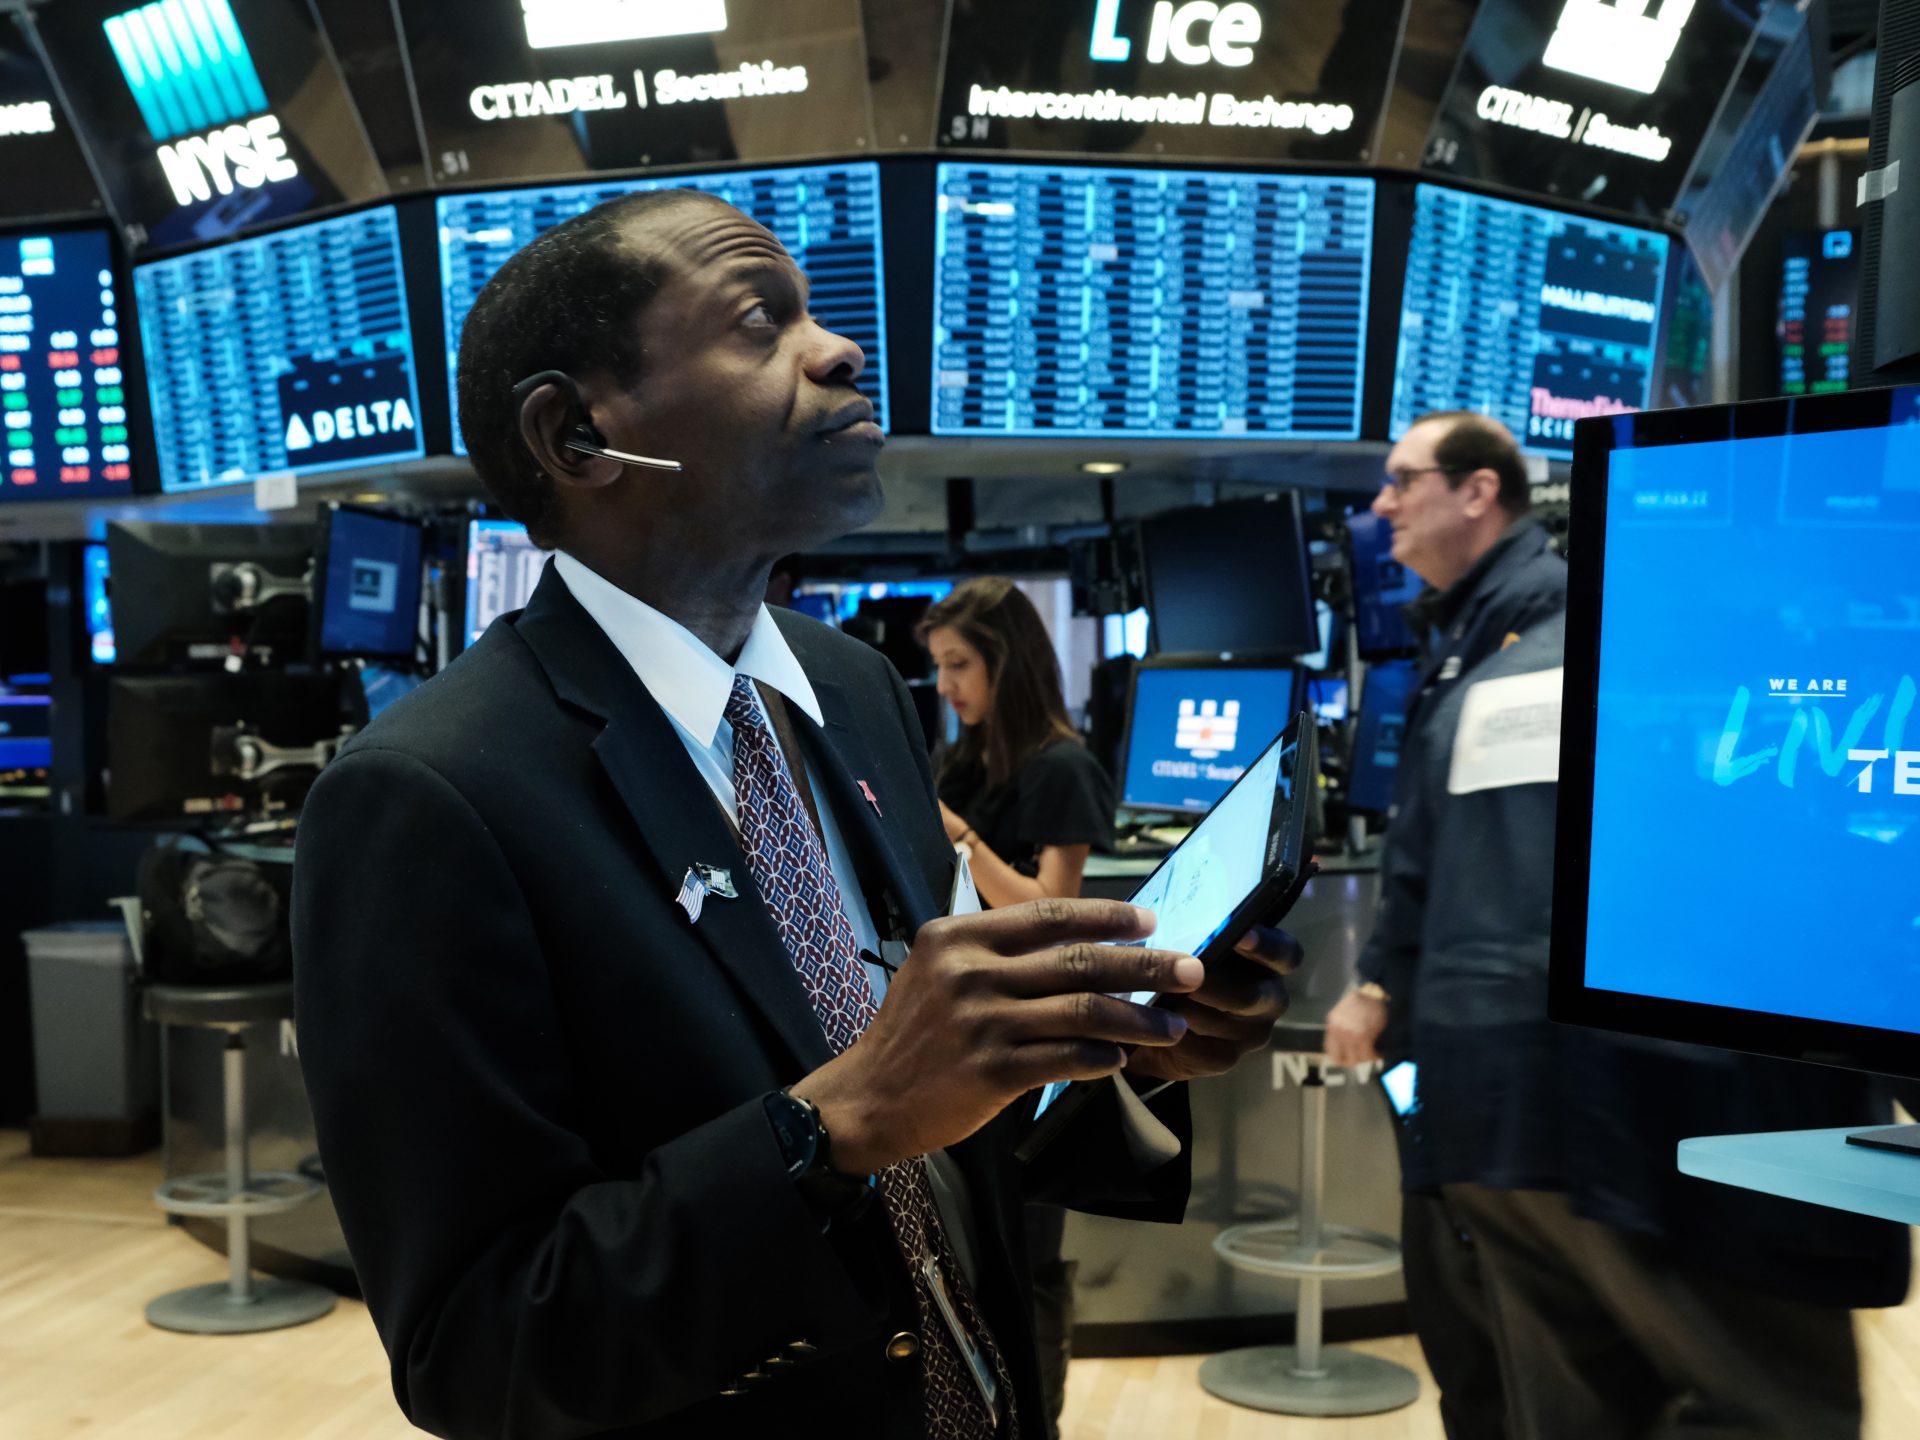 U.S. stock indexes rose sharply on Monday in anticipation of the Federal Reserve's interest rate cut.